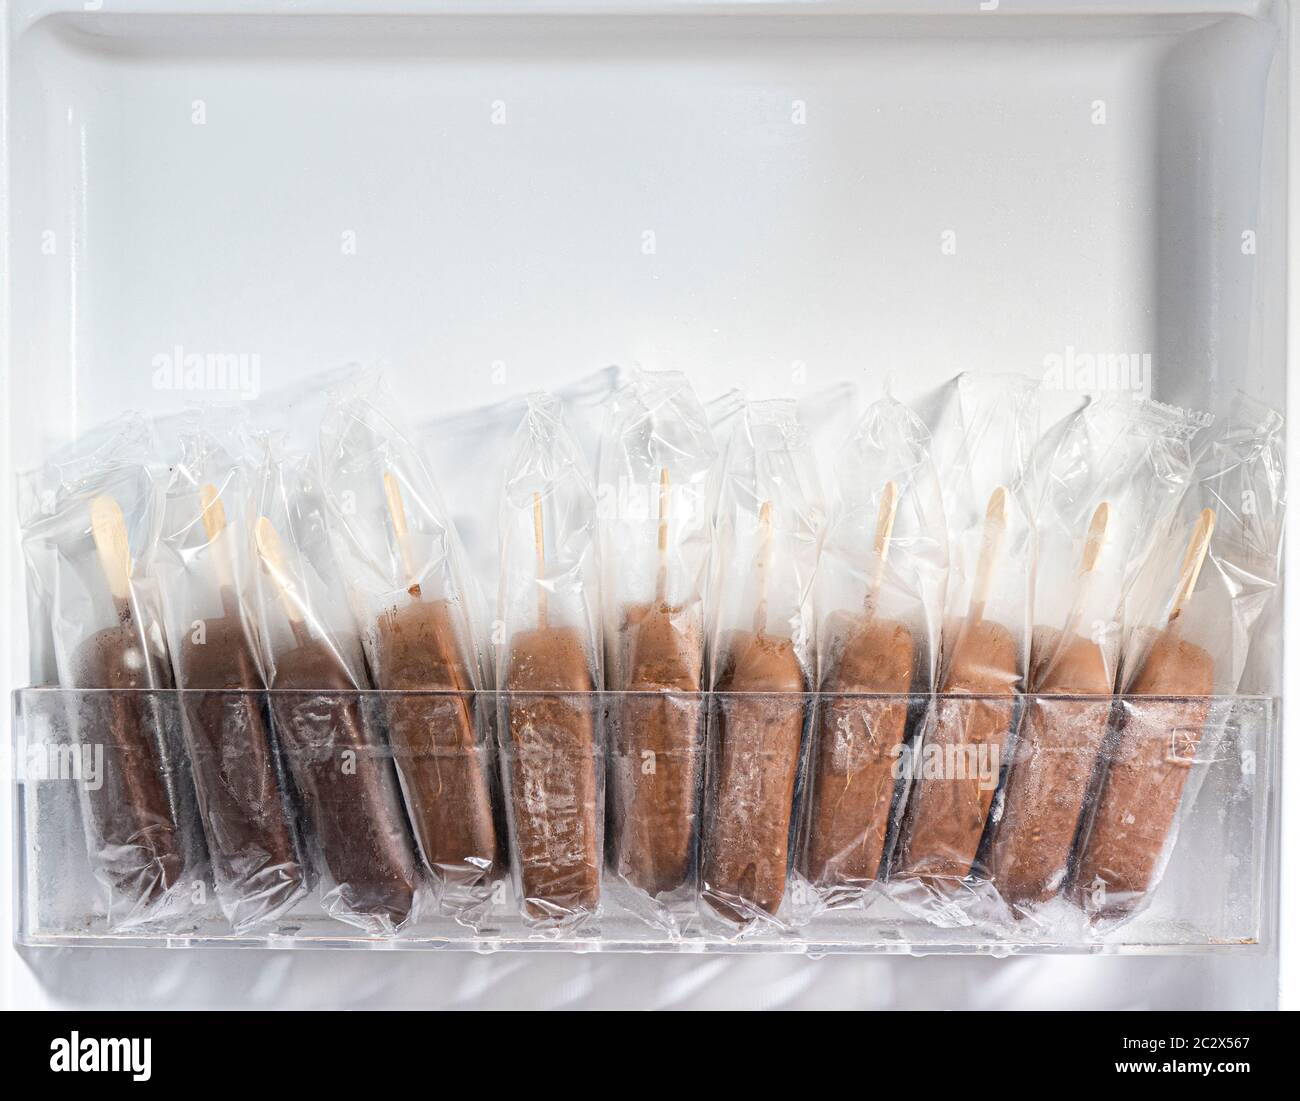 Closeup of 11 unbranded chocolate coated ice cream lollies in transparent wrappers, standing in a row in the open door of a freezer. Stock Photo